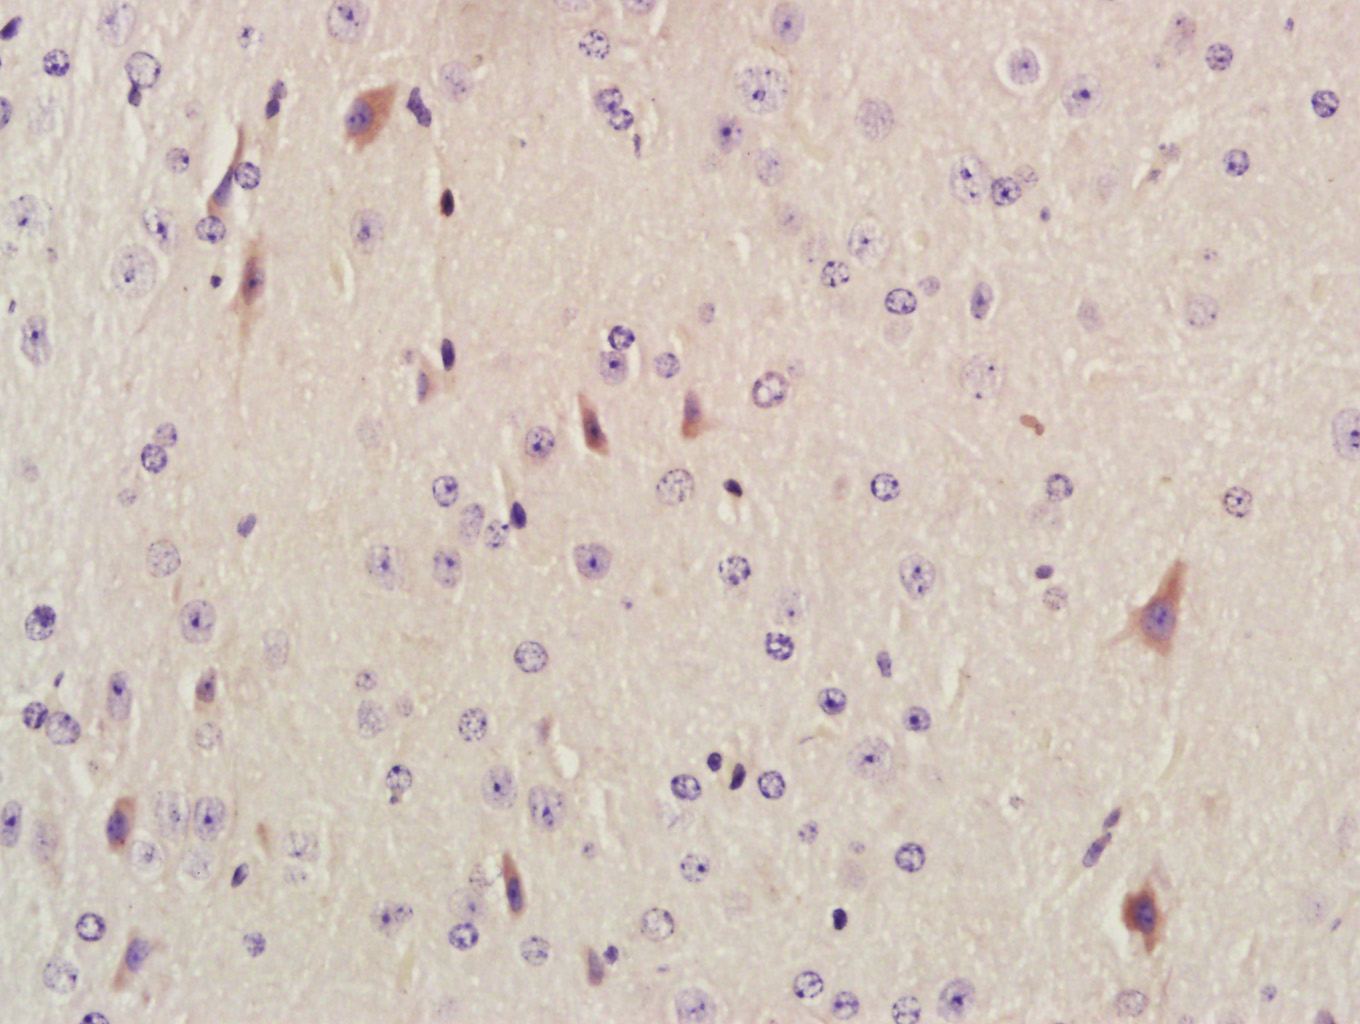 Paraformaldehyde-fixed, paraffin embedded mouse brain; Antigen retrieval by boiling in sodium citrate buffer (pH6.0) for 15min; Block endogenous peroxidase by 3% hydrogen peroxide for 20 minutes; Blocking buffer (normal goat serum) at 37°C for 30min; Antibody incubation with AKAP12 Polyclonal Antibody, Unconjugated (bs-1381R) at 1:400 overnight at 4°C, followed by a conjugated secondary antibody for 20 minutes and DAB staining.